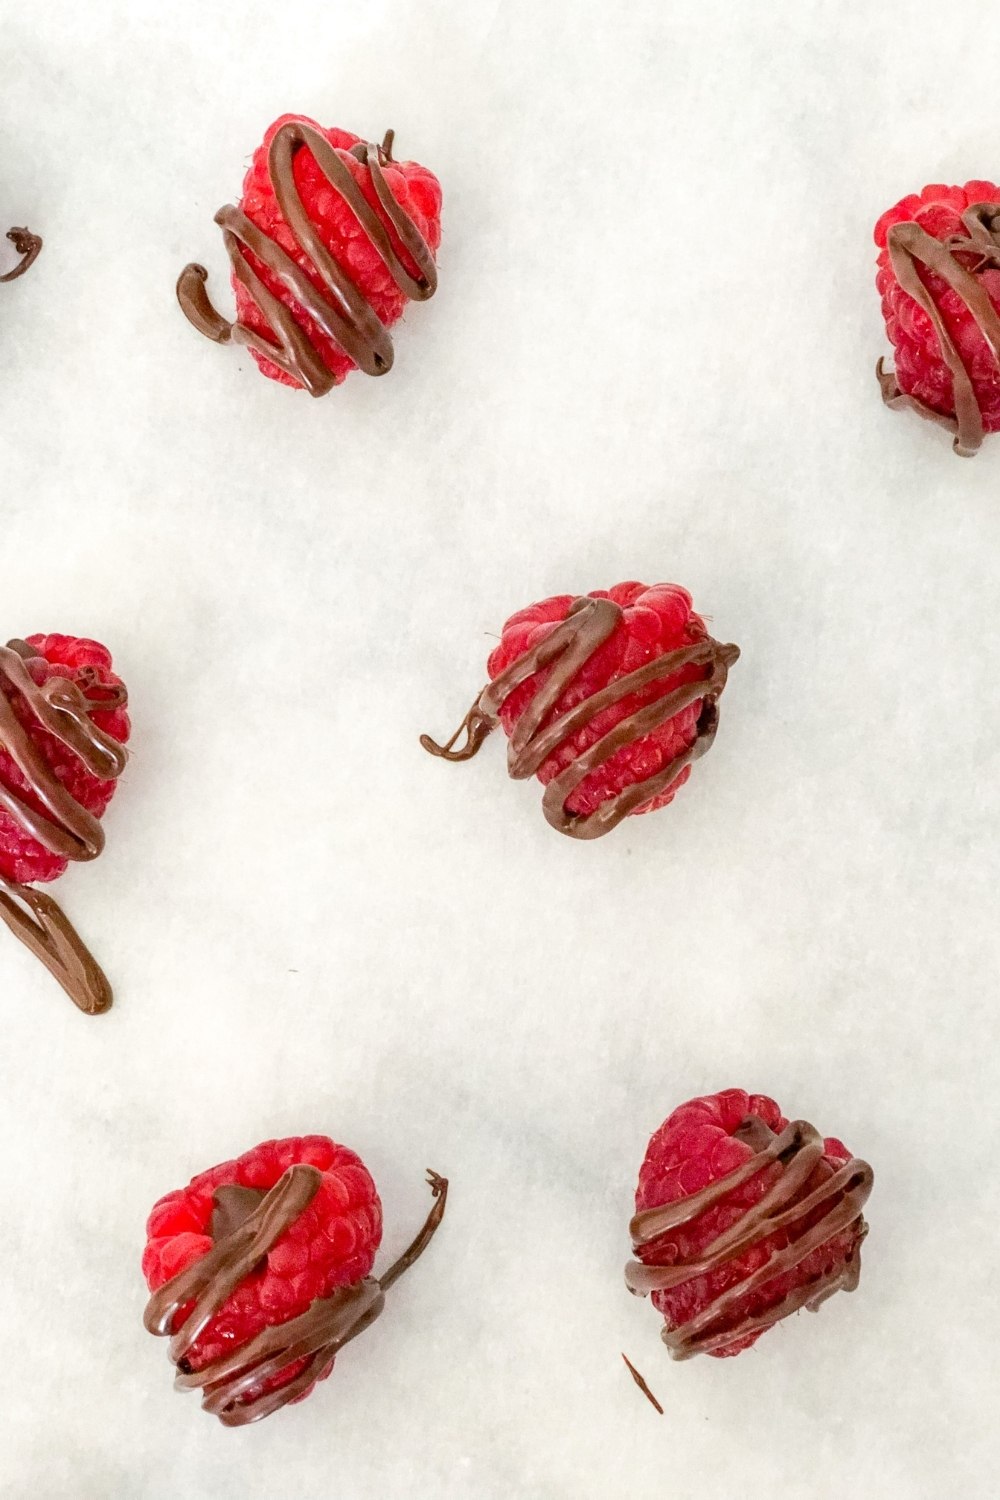 raspberries with chocolate drizzle on parchment paper